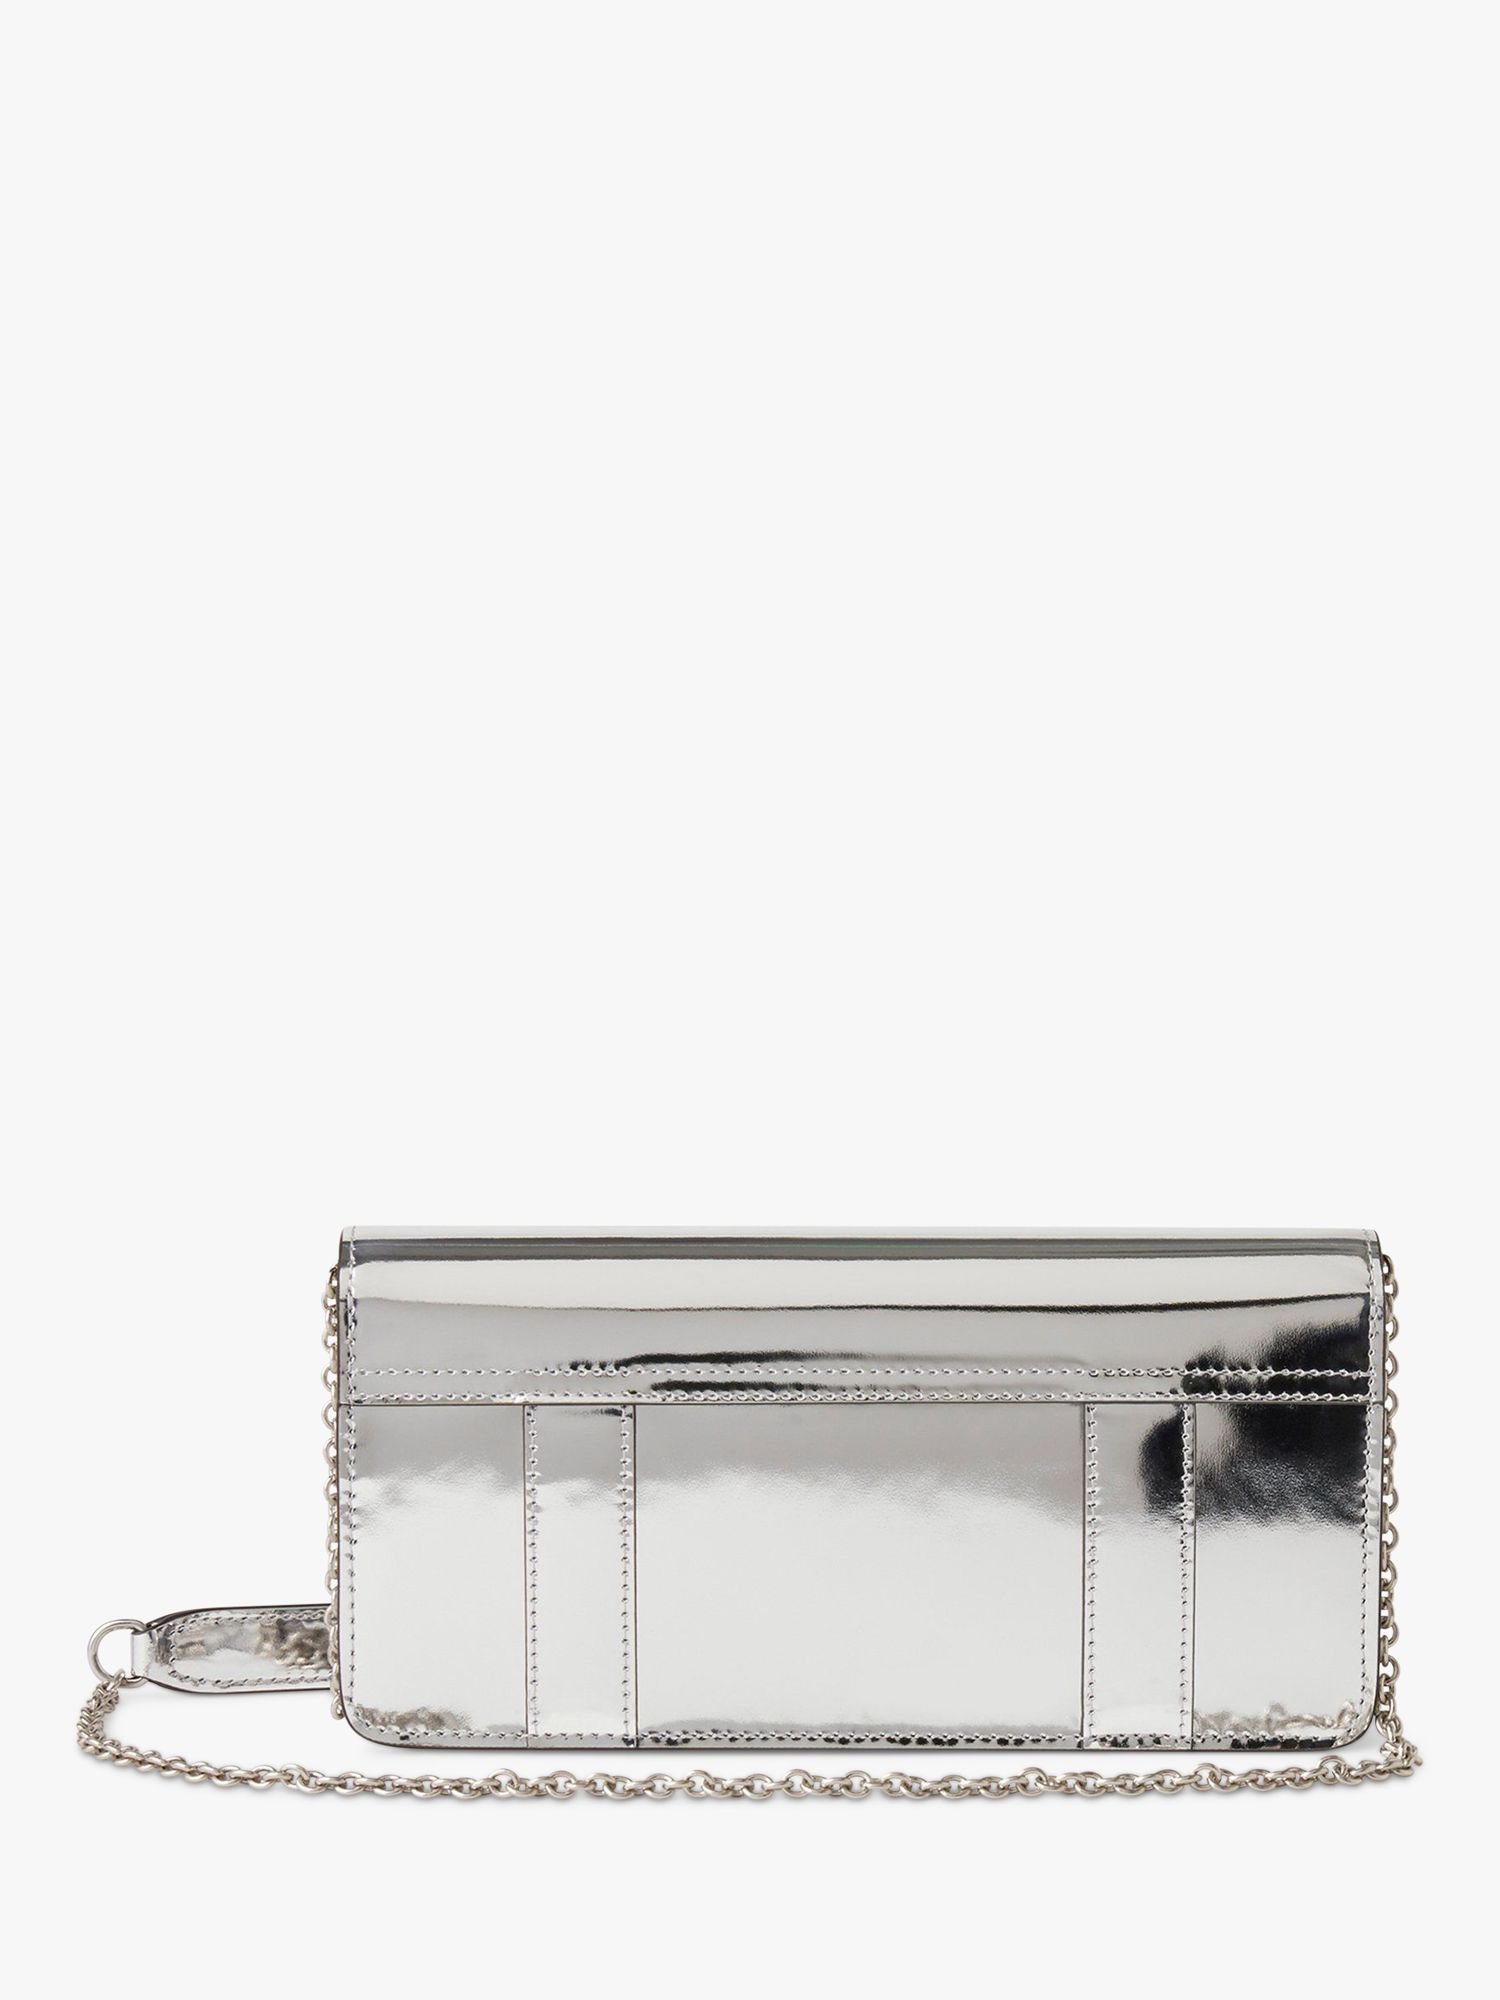 Mulberry East West Bayswater Clutch, Silver at John Lewis & Partners